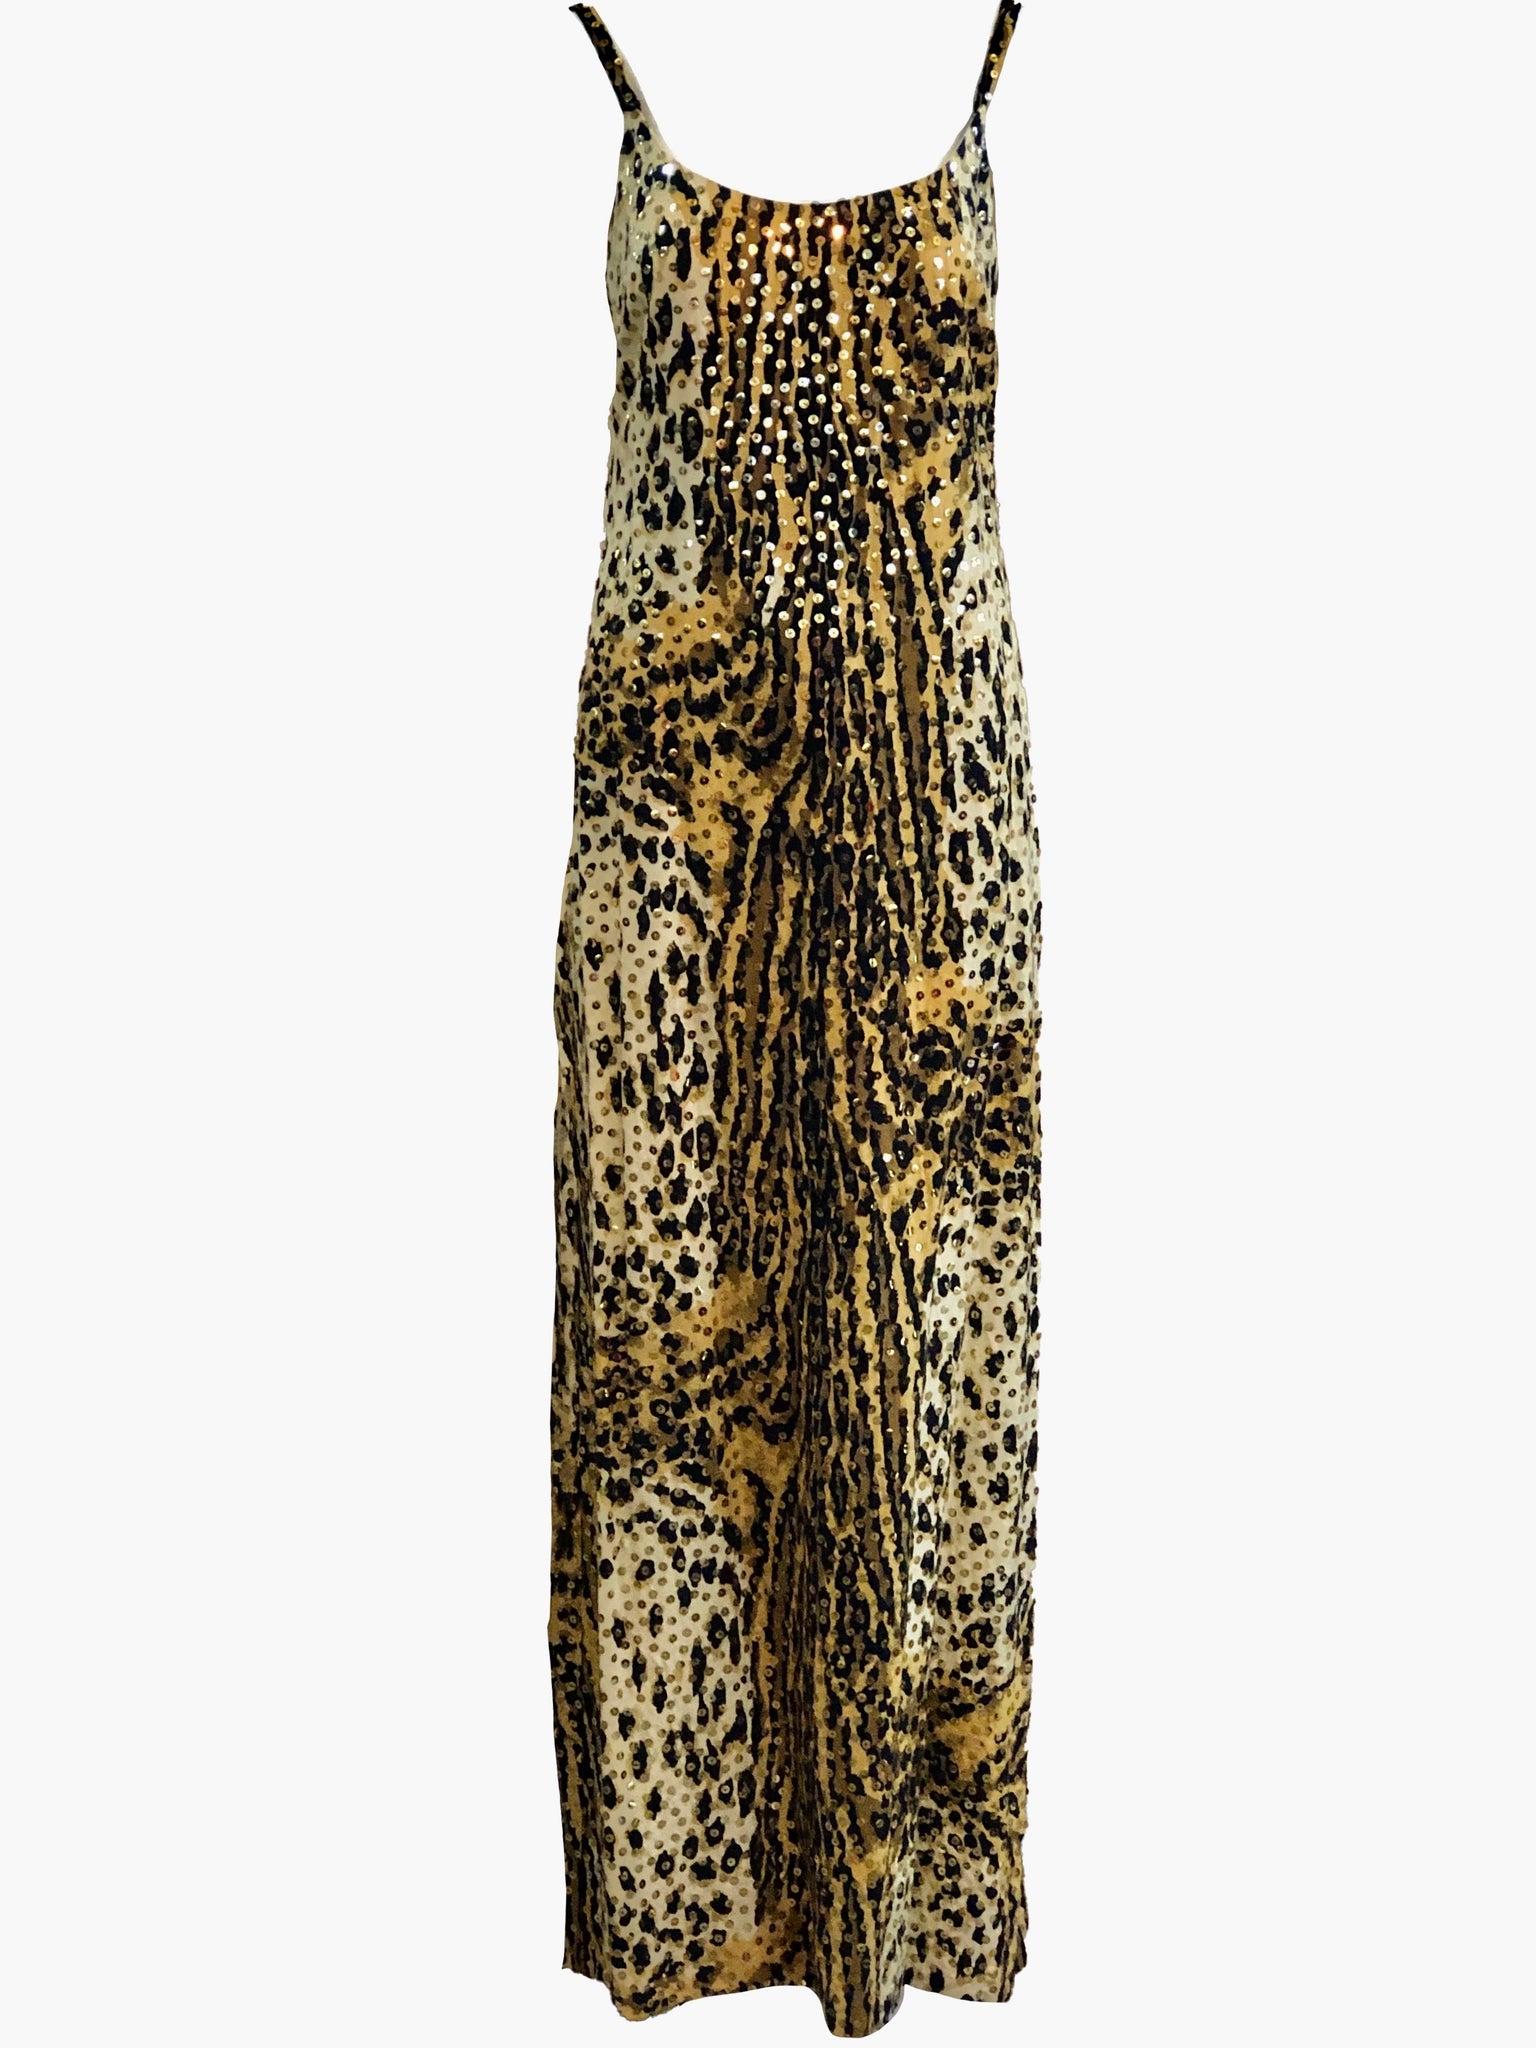  Mollie Parnis 70s Leopard Print Gown with Sequins and Matching Jacket FRONT DRESS 3 of 7